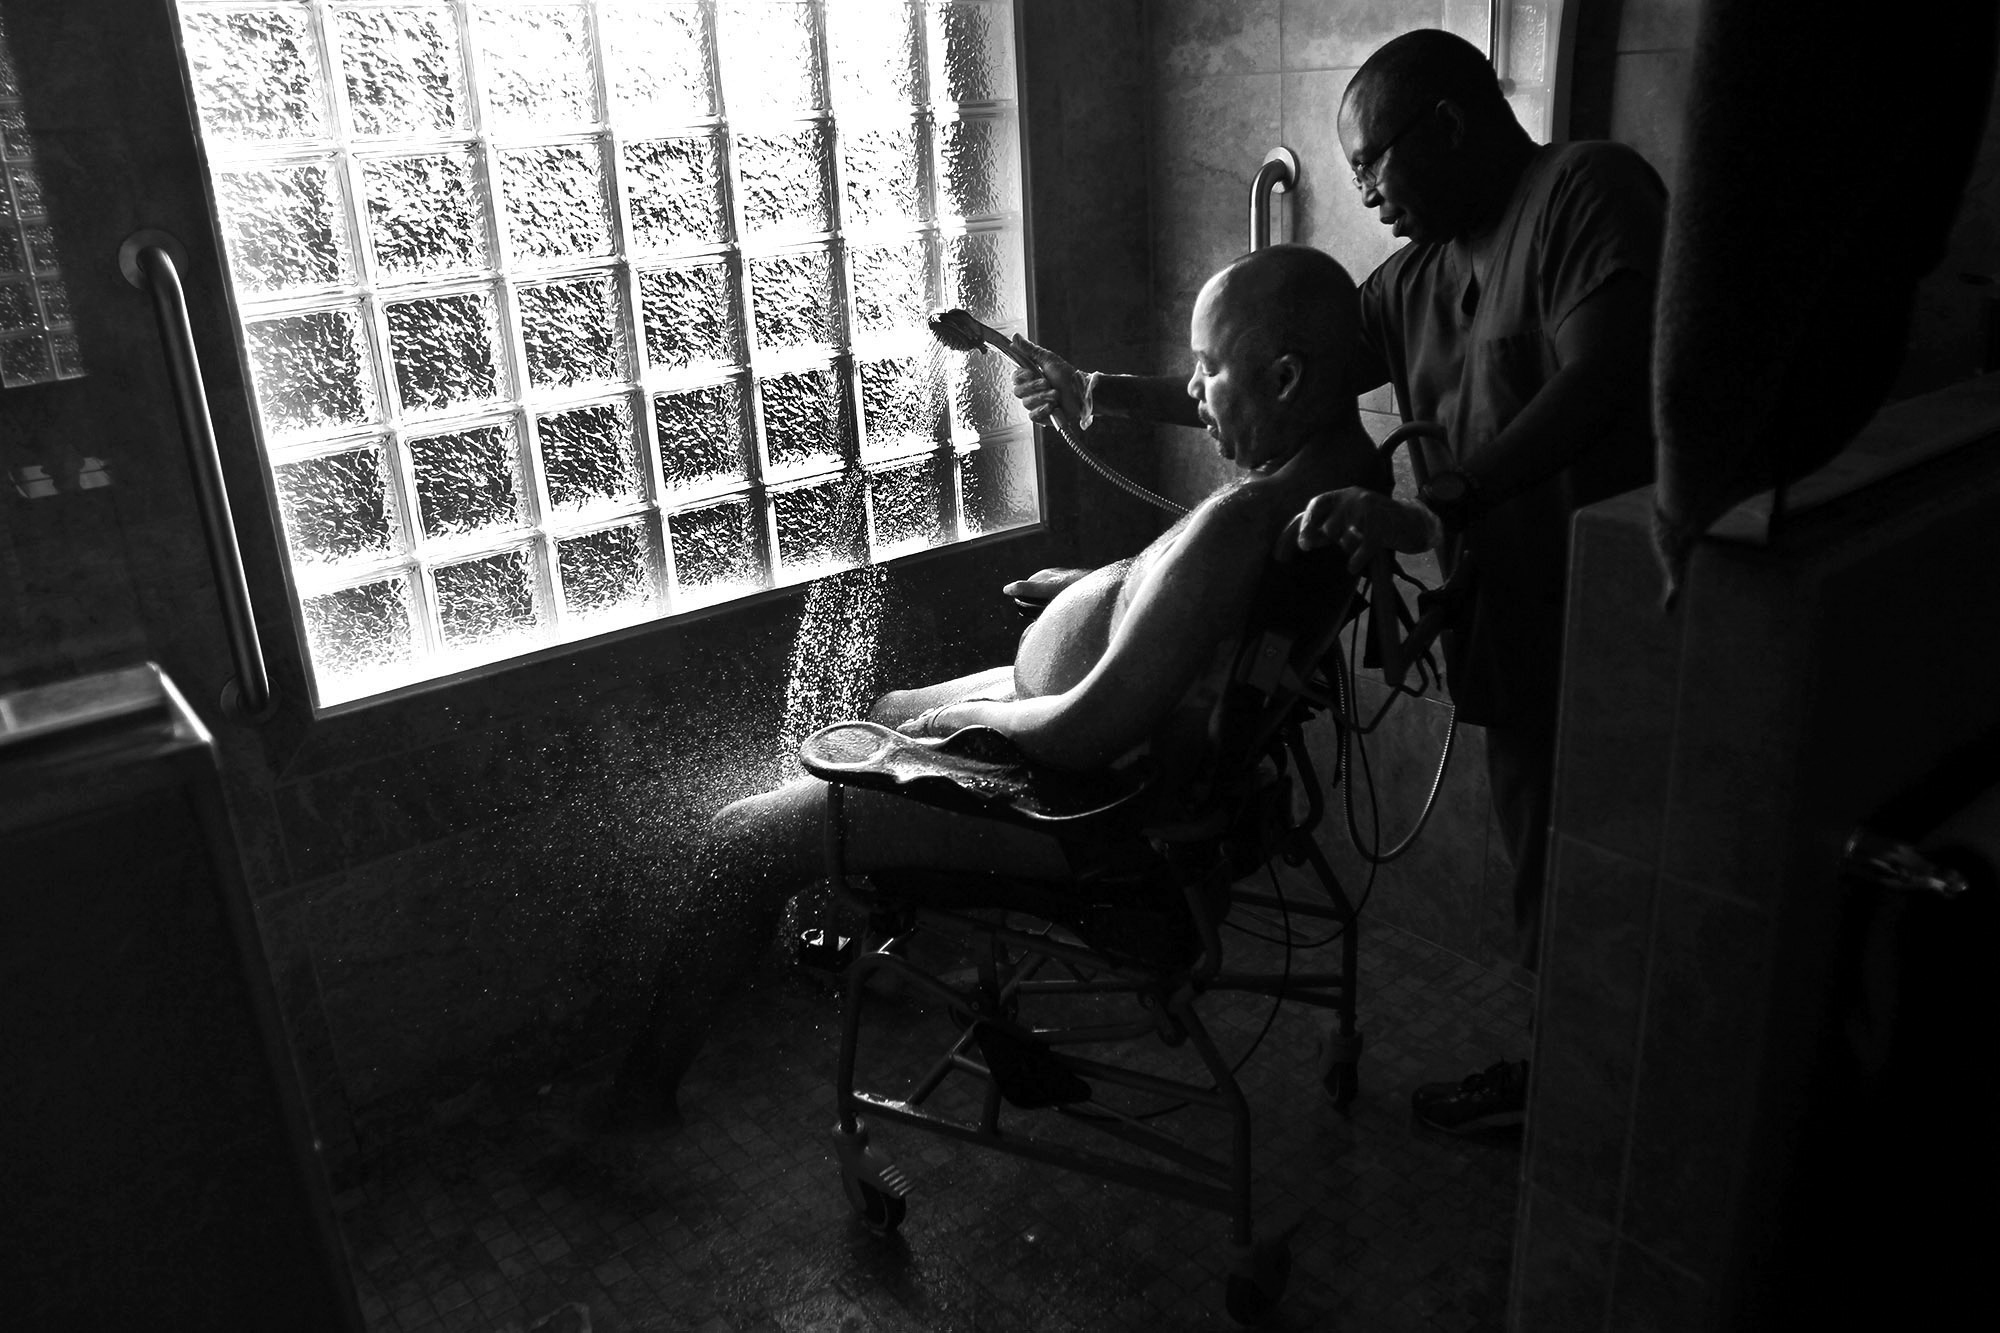  Professional caretaker James Ndegwa bathes Persian Gulf War veteran Mike White, who has amyotrophic lateral sclerosis, which renders him nearly paralyzed.&nbsp; 